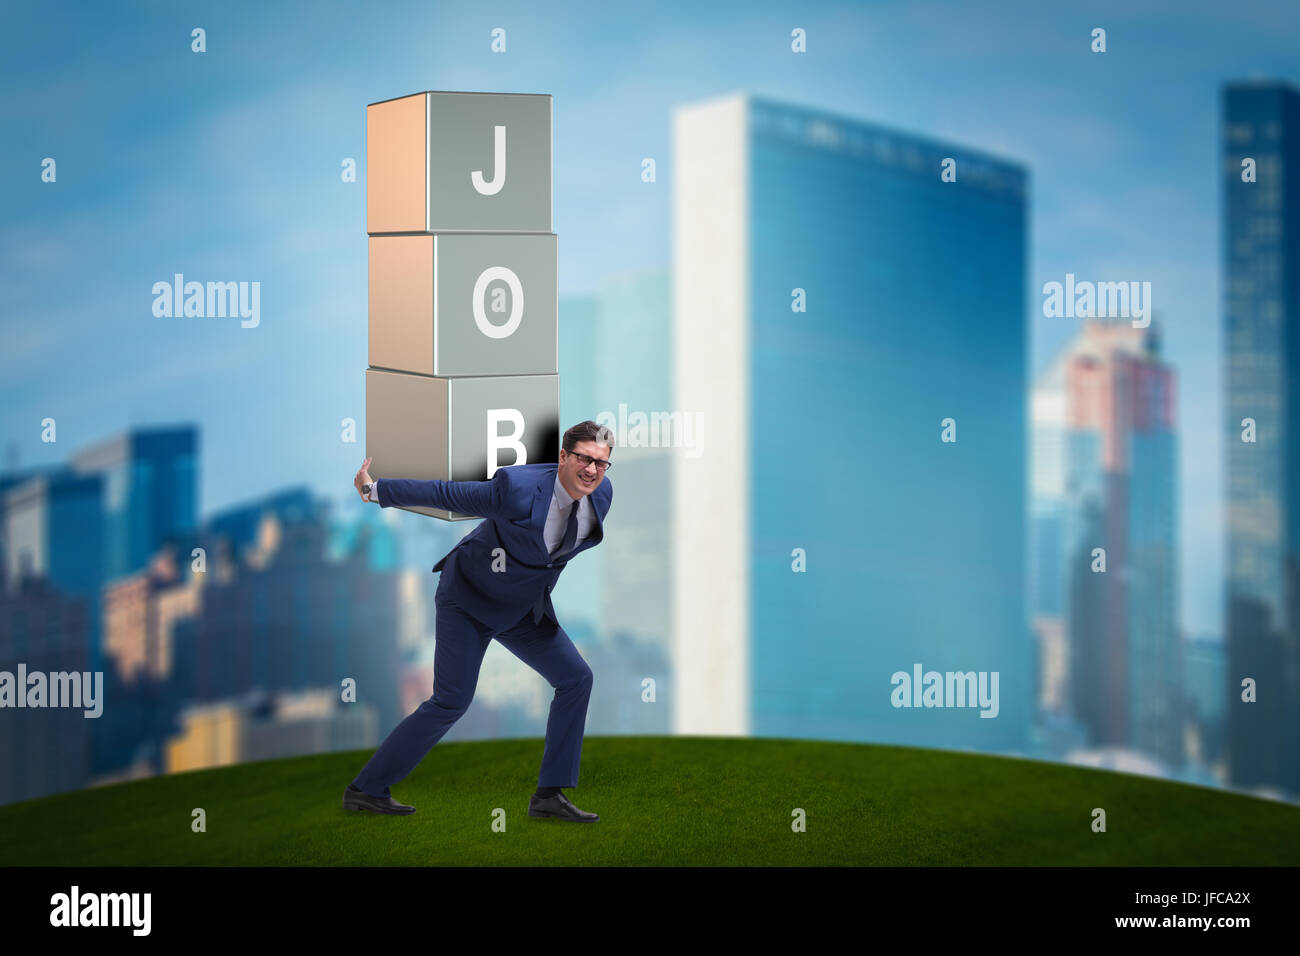 Businessman carrying the burden of his job Stock Photo